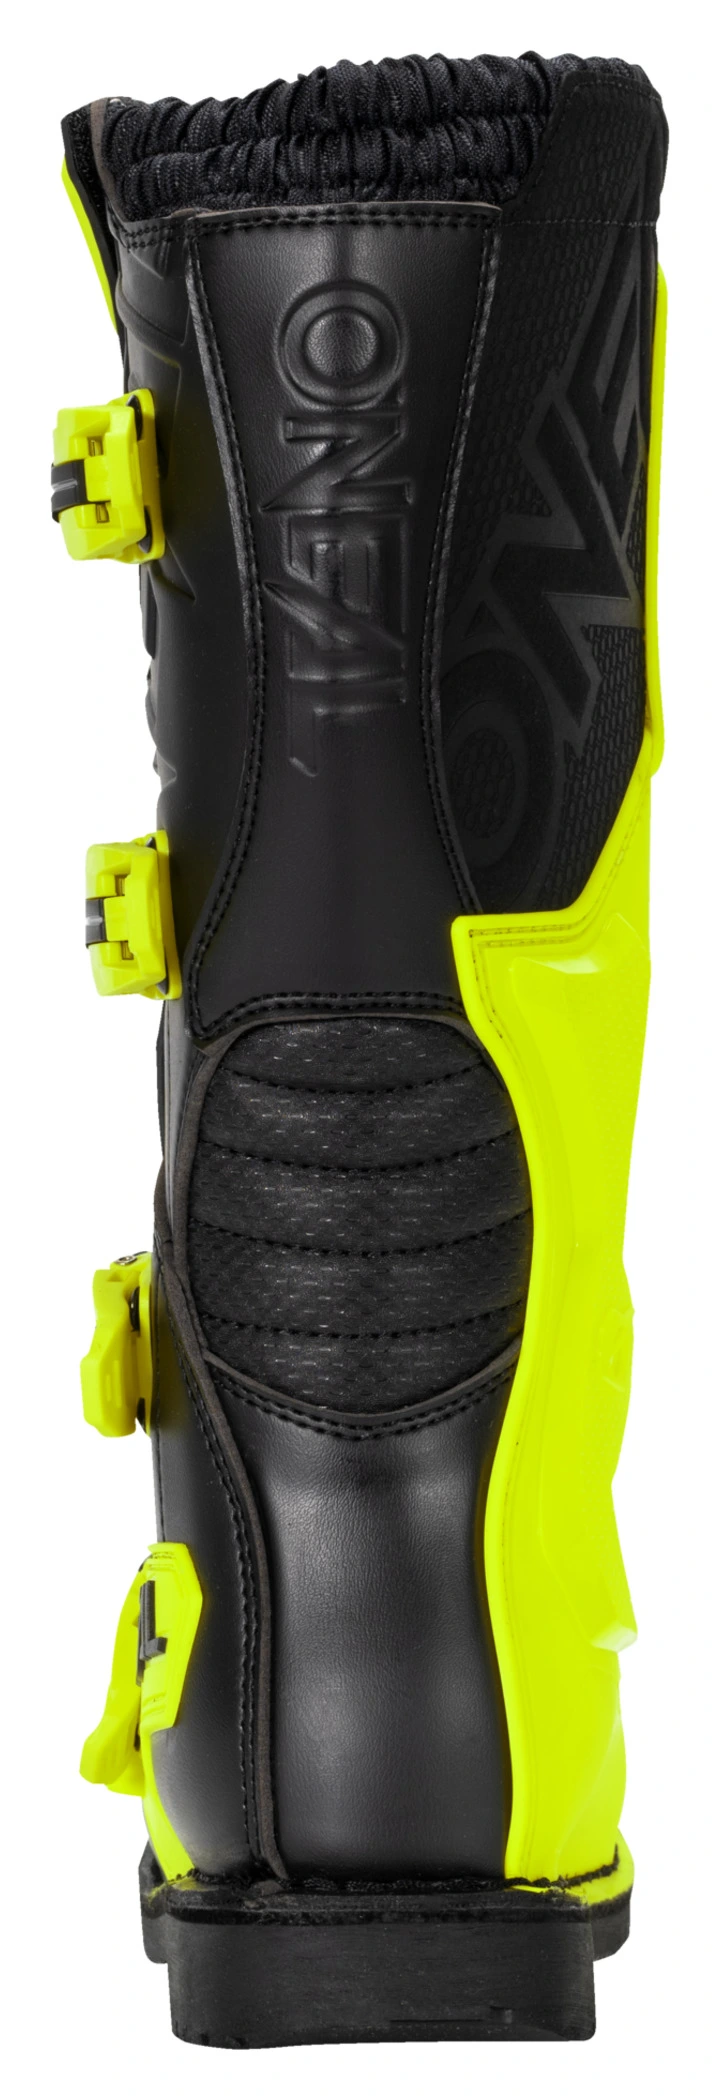 ONEAL RIDER PRO BOOT